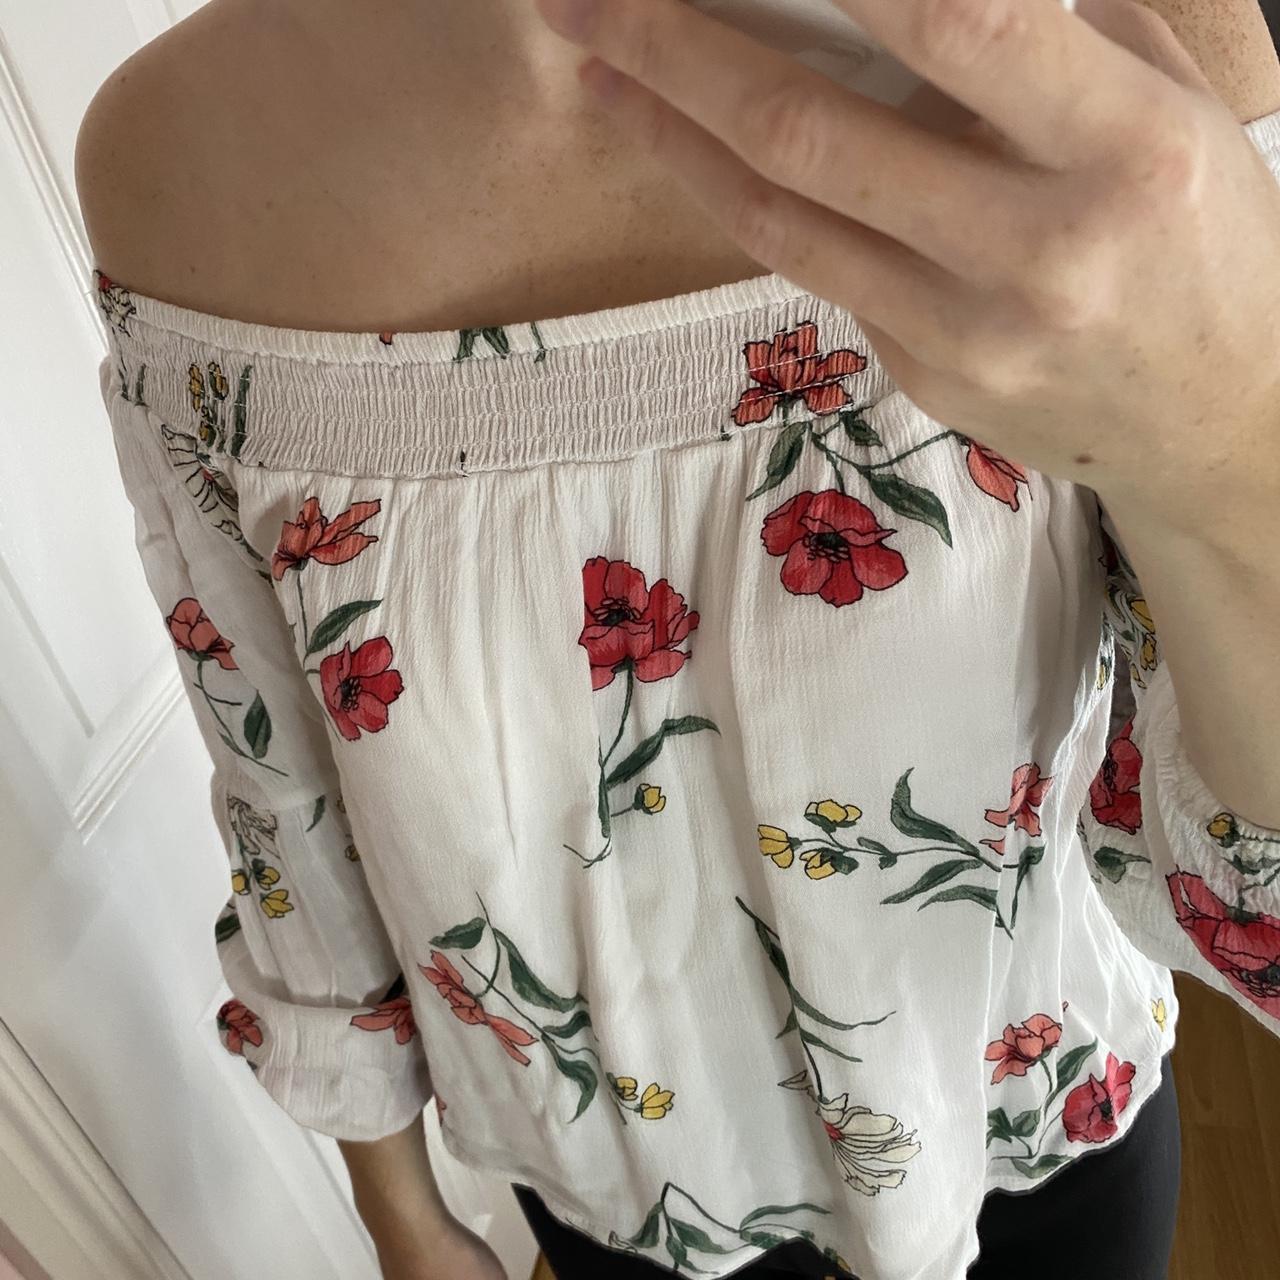 Hollister Co. Women's White and Red Blouse | Depop